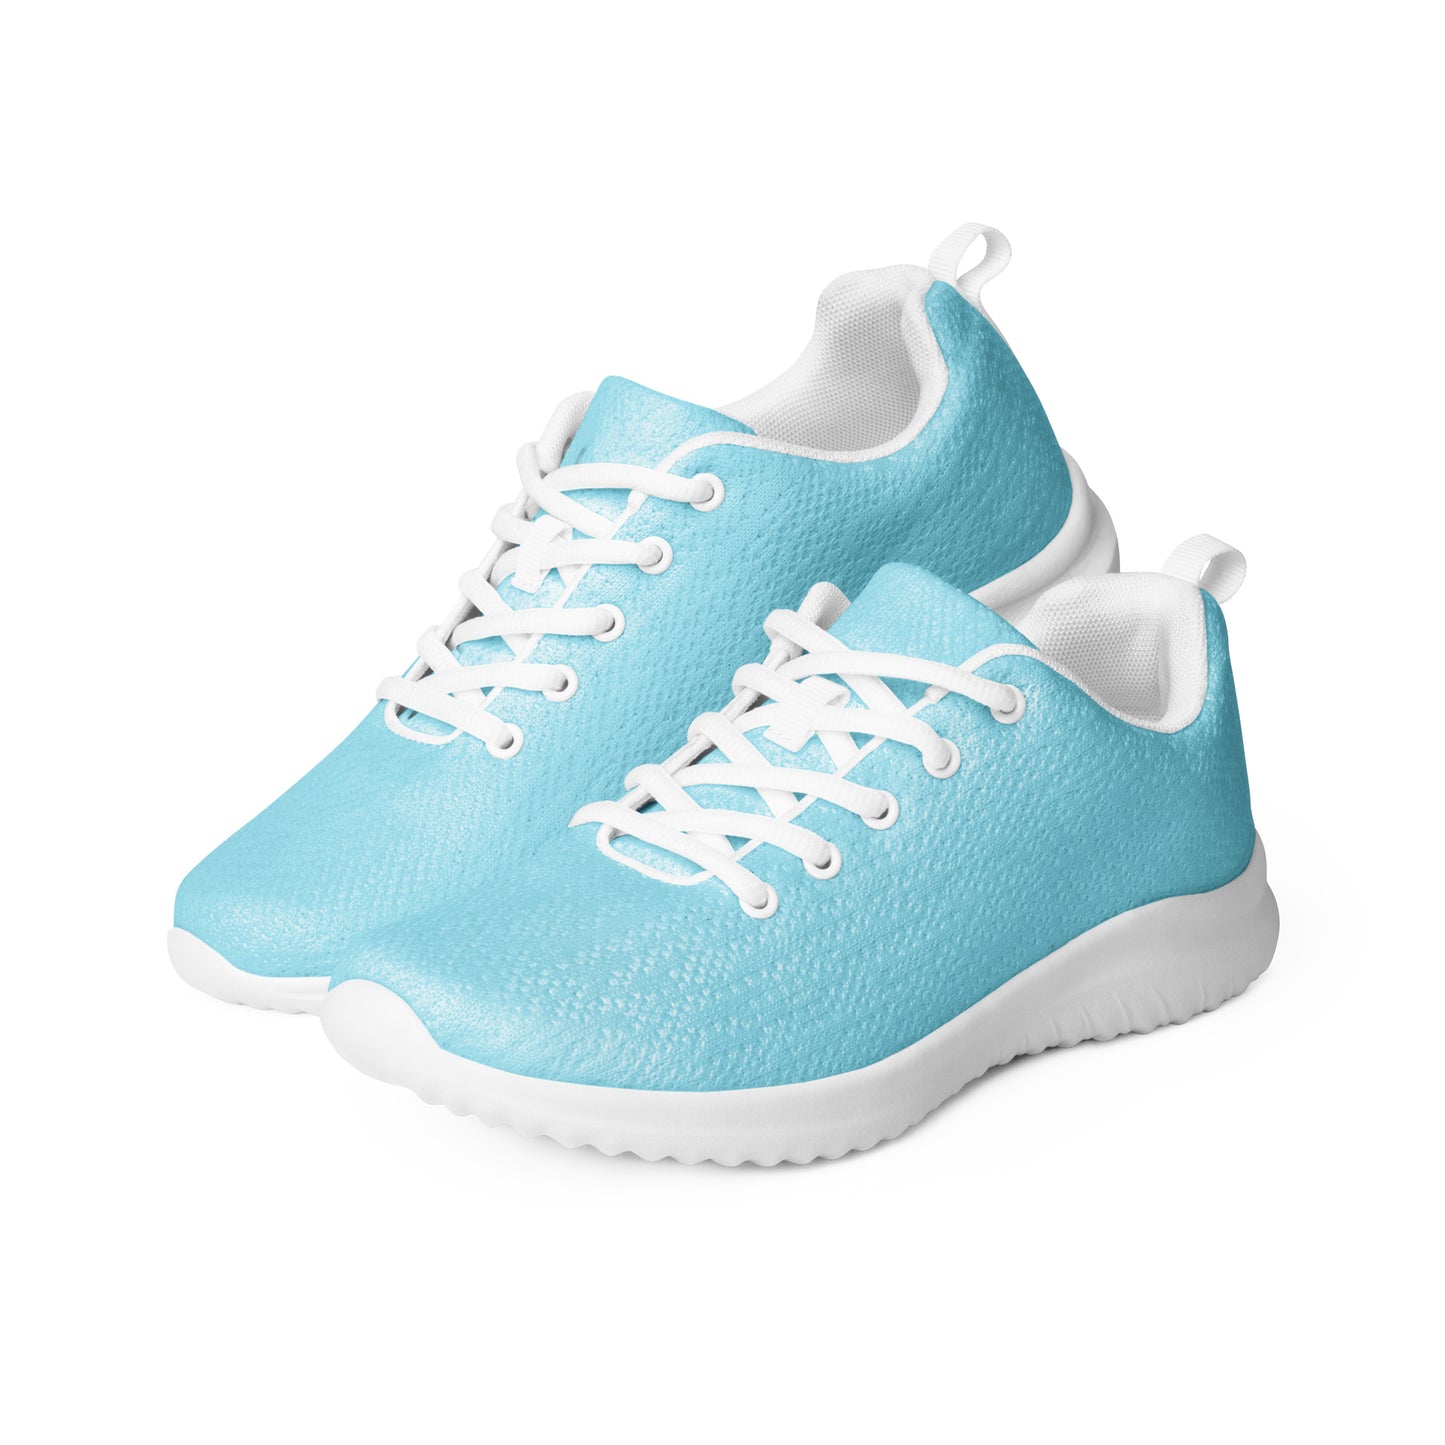 DASH Baby Blue Women’s Athletic Shoes Lightweight Breathable Design by IOBI Original Apparel